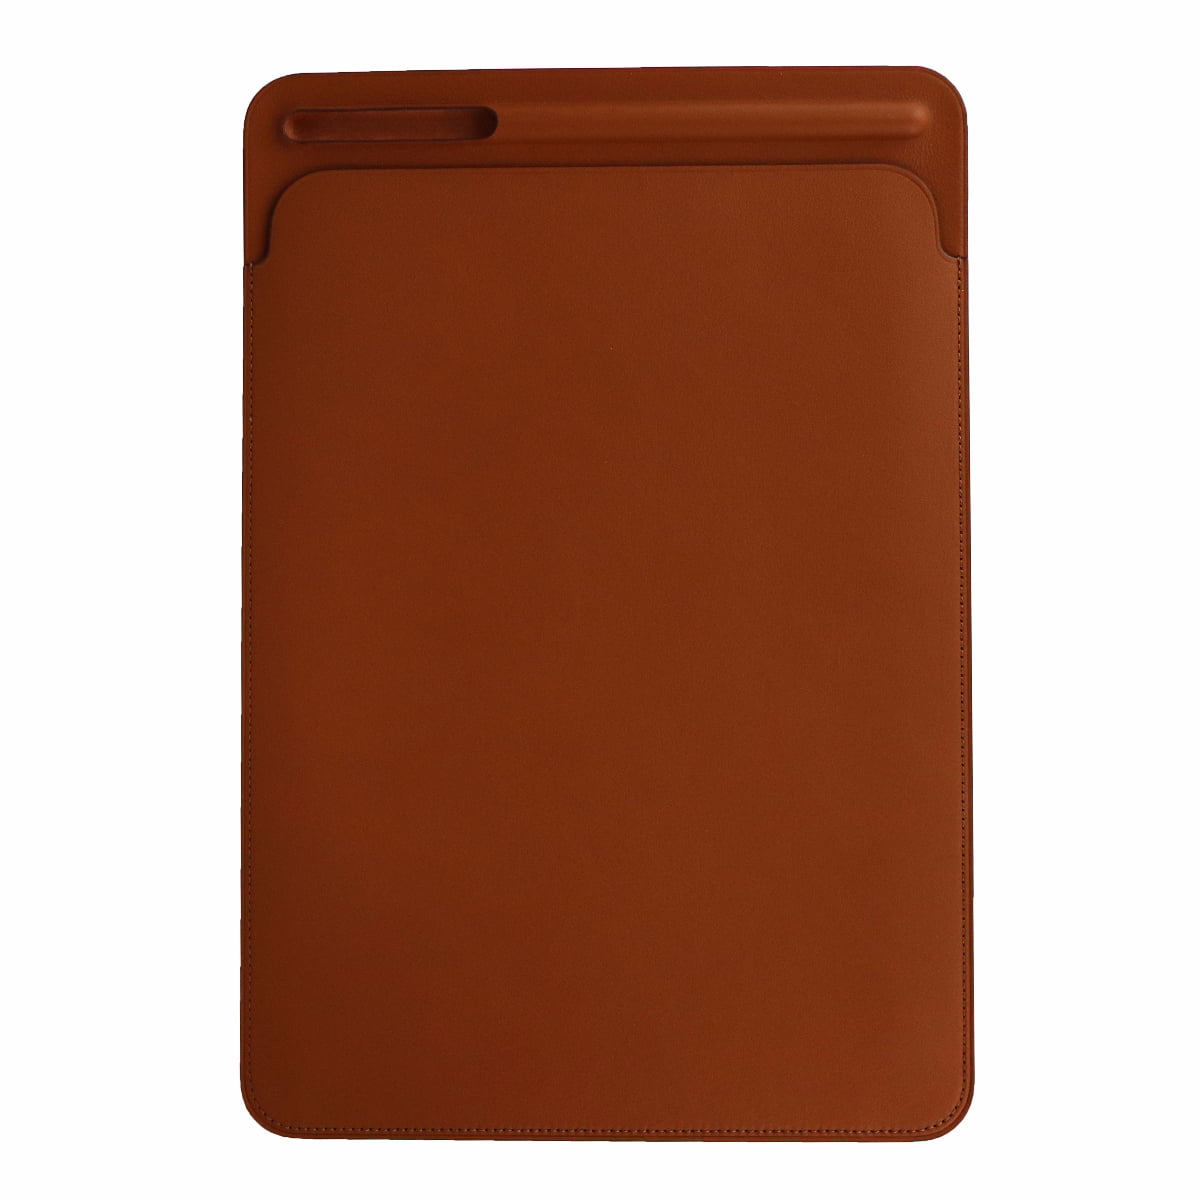 Light brown color iPad case NEW iPad Pro 12.9 inch leather sleeve iPad Pro 2018 Apple Pencil holder and Smart keyboard